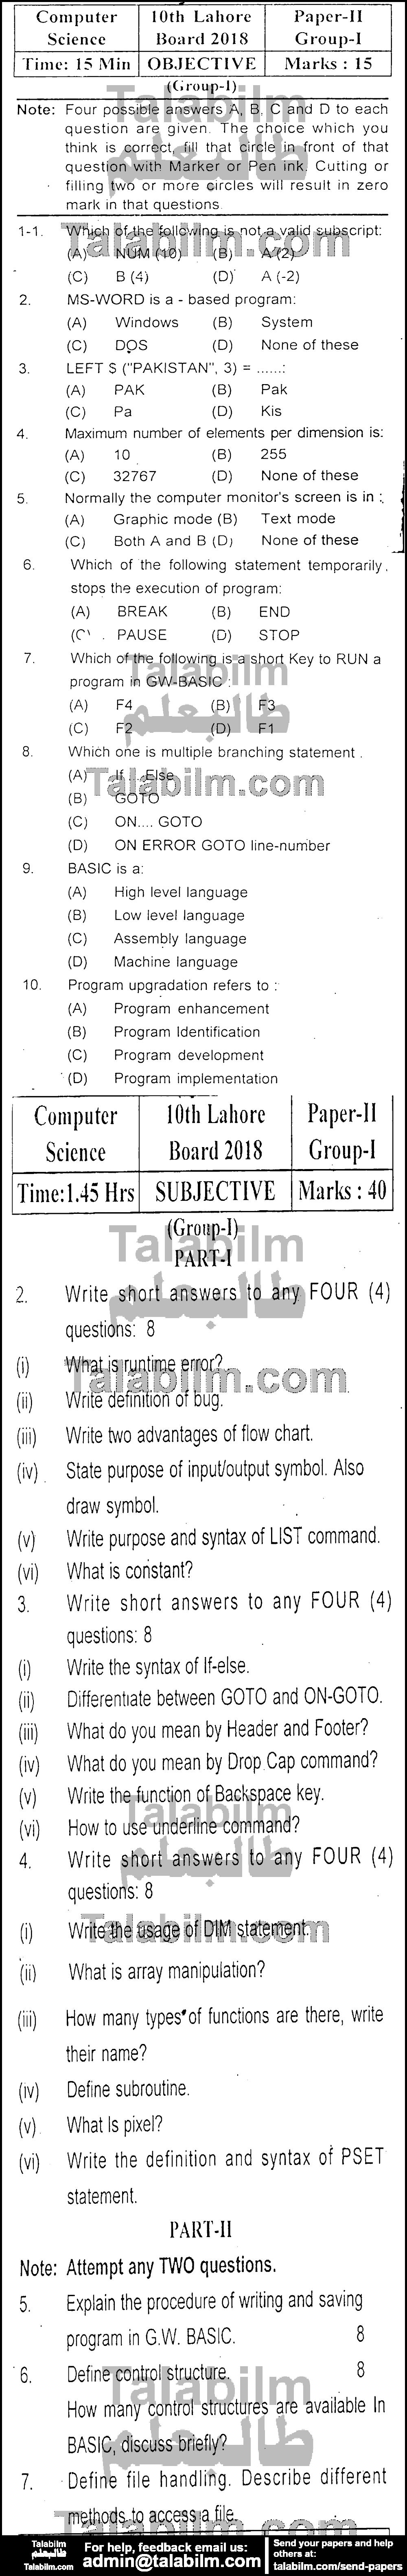 Computer Science 0 past paper for English Medium 2018 Group-I